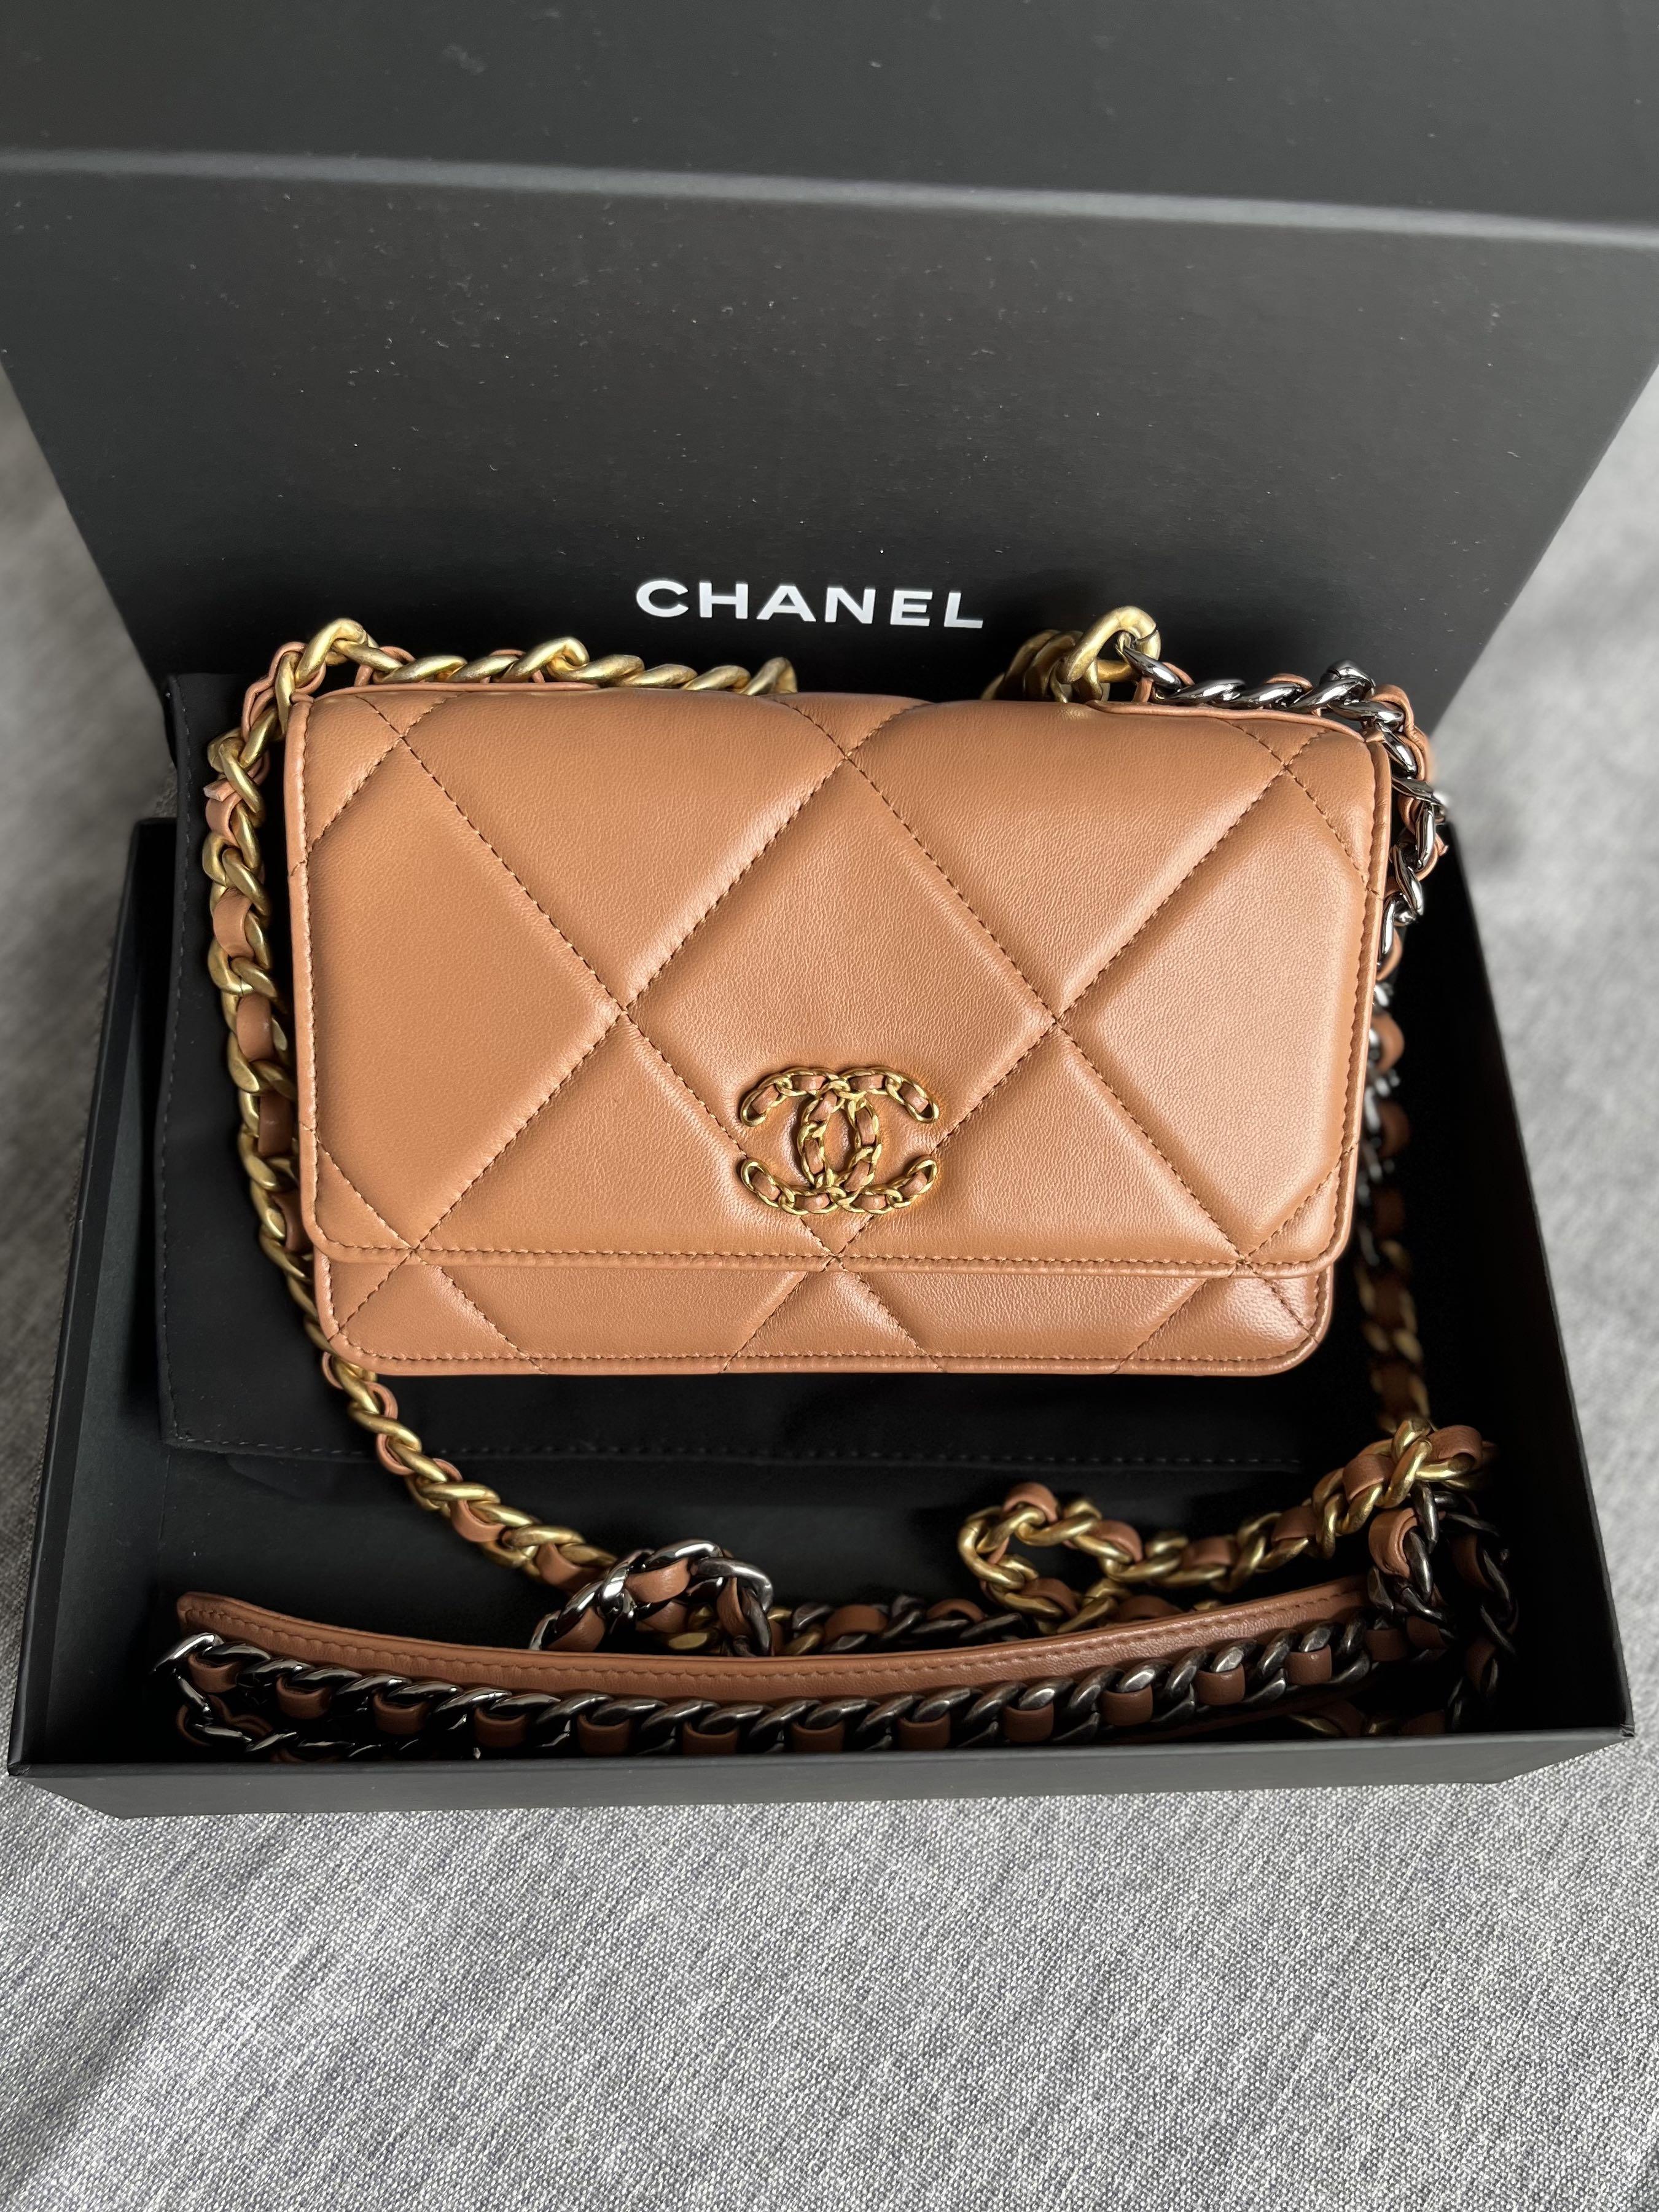 Authentic C h a n e l 19, Wallet On Chain, Caramel Lamb, Series 31